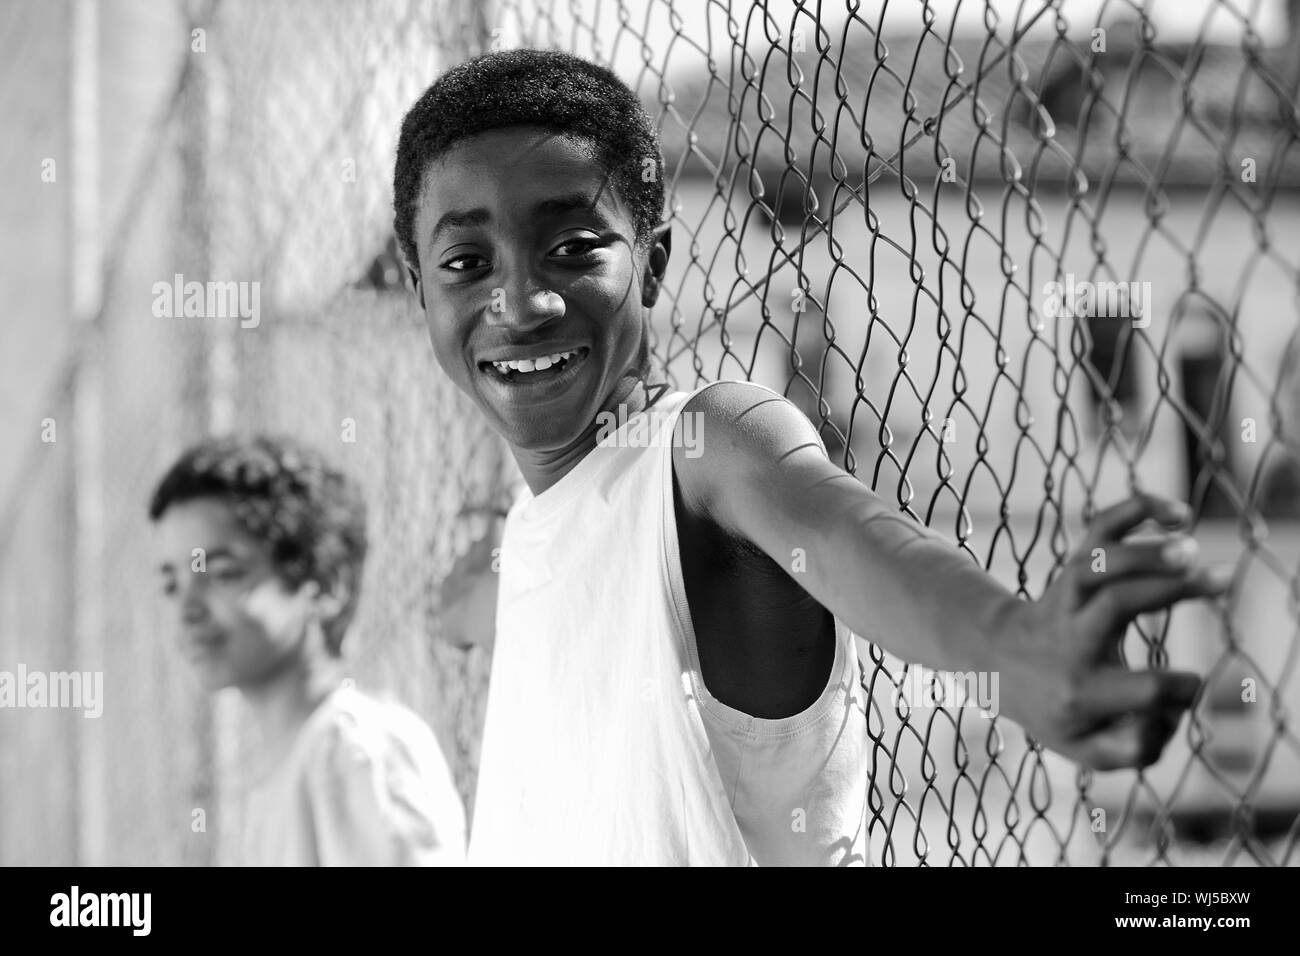 Portrait of a cheerful young African boy Stock Photo